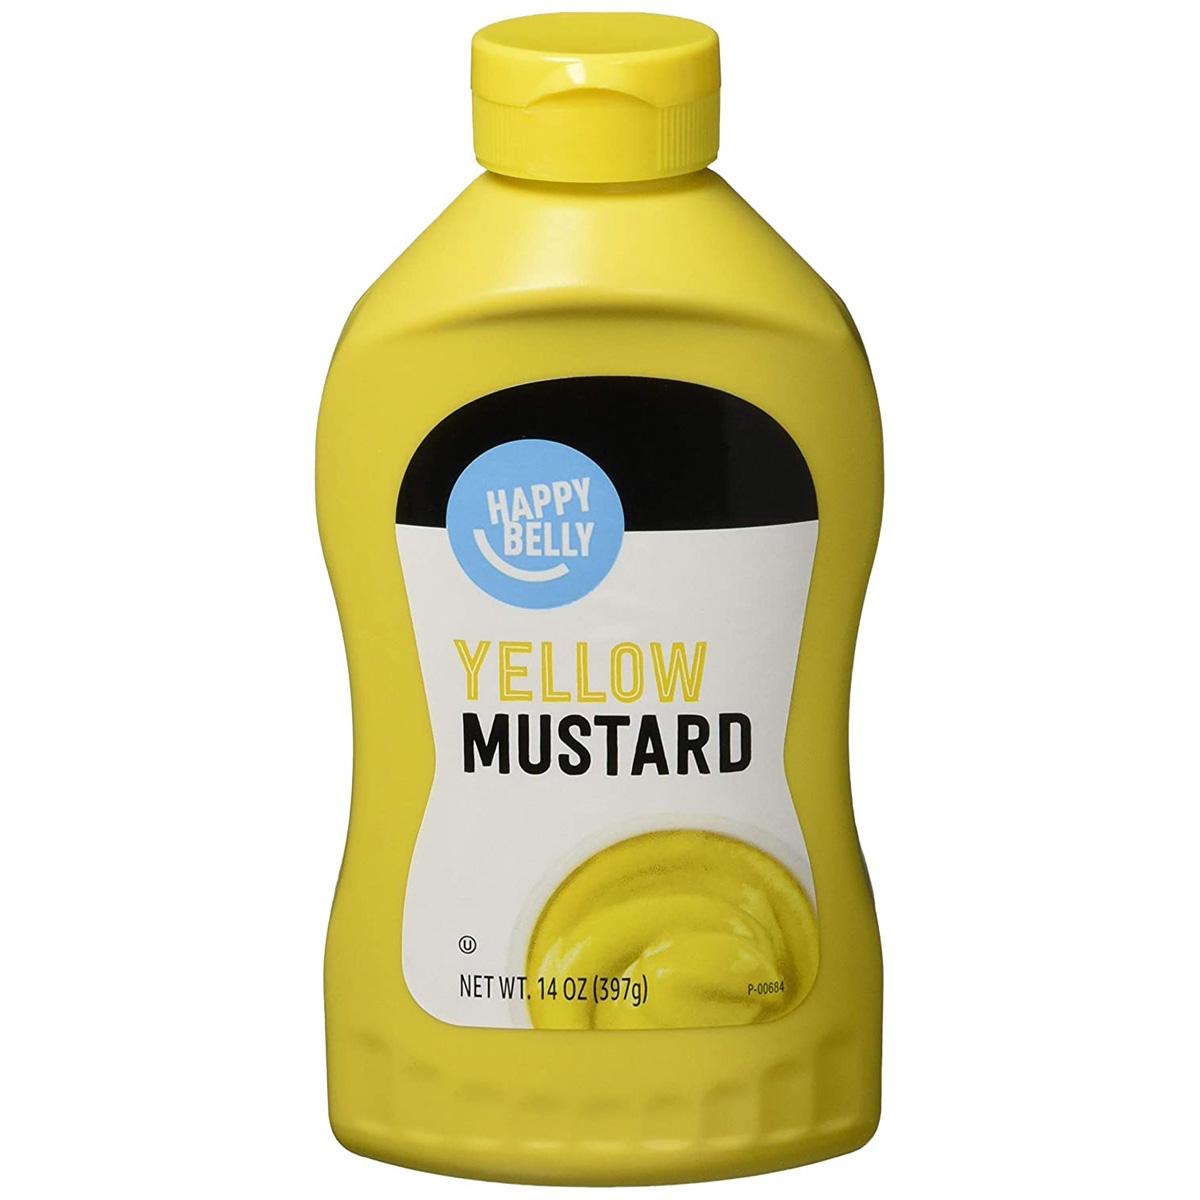 Amazon Brand Happy Belly Yellow Mustard for $0.71